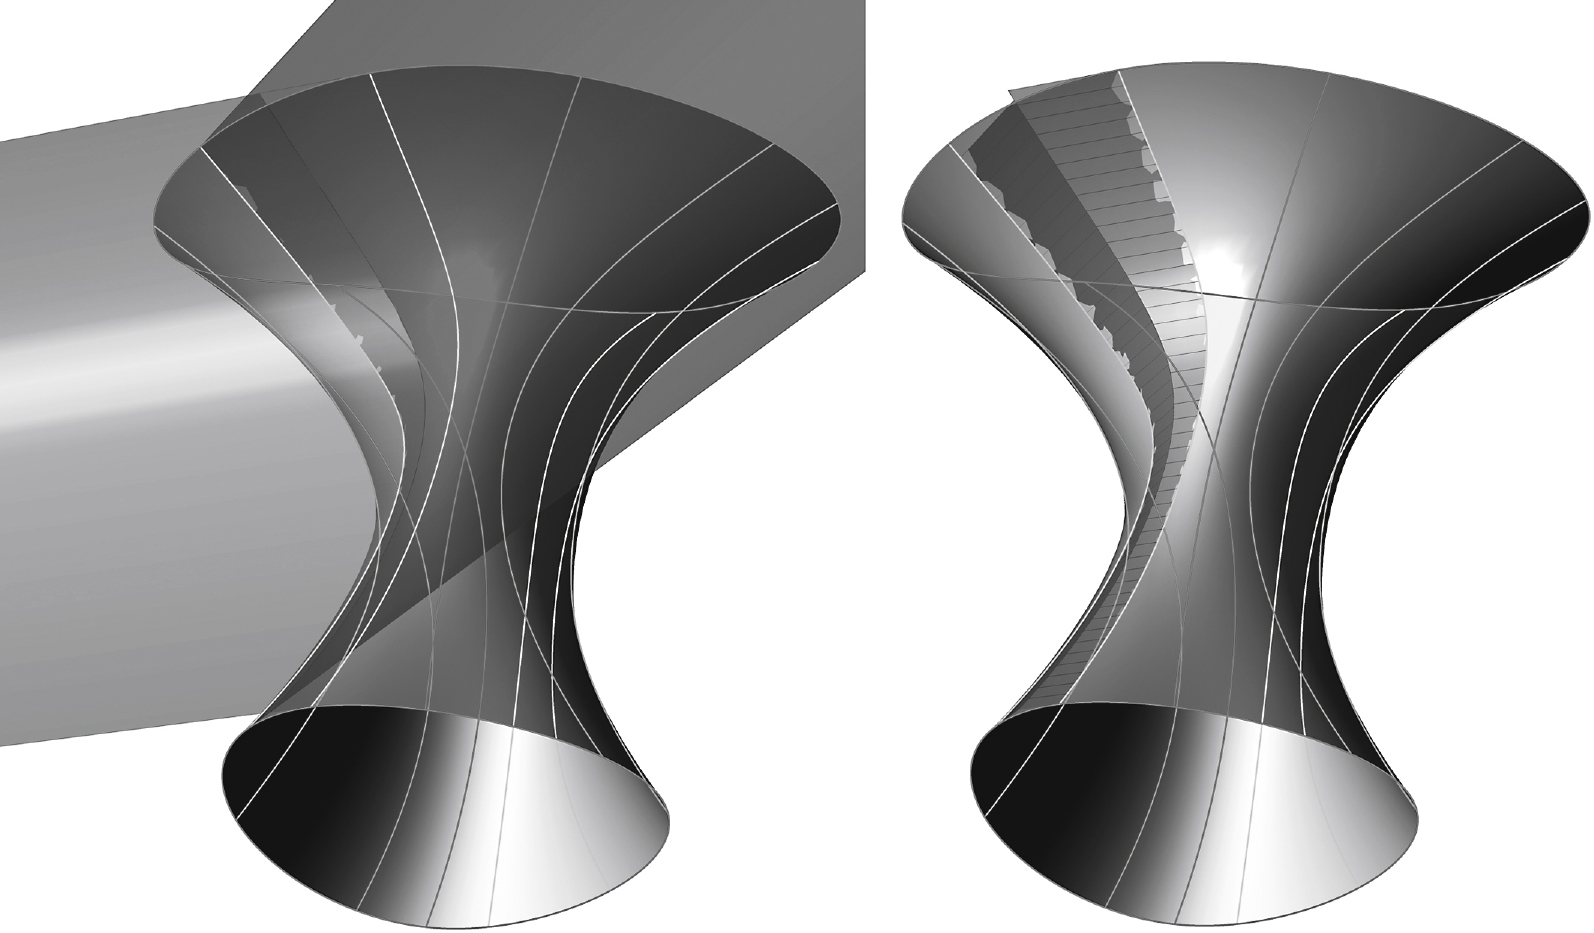 Contours obtained from improper straight trajectory. Projecting cylindrical surfaces.